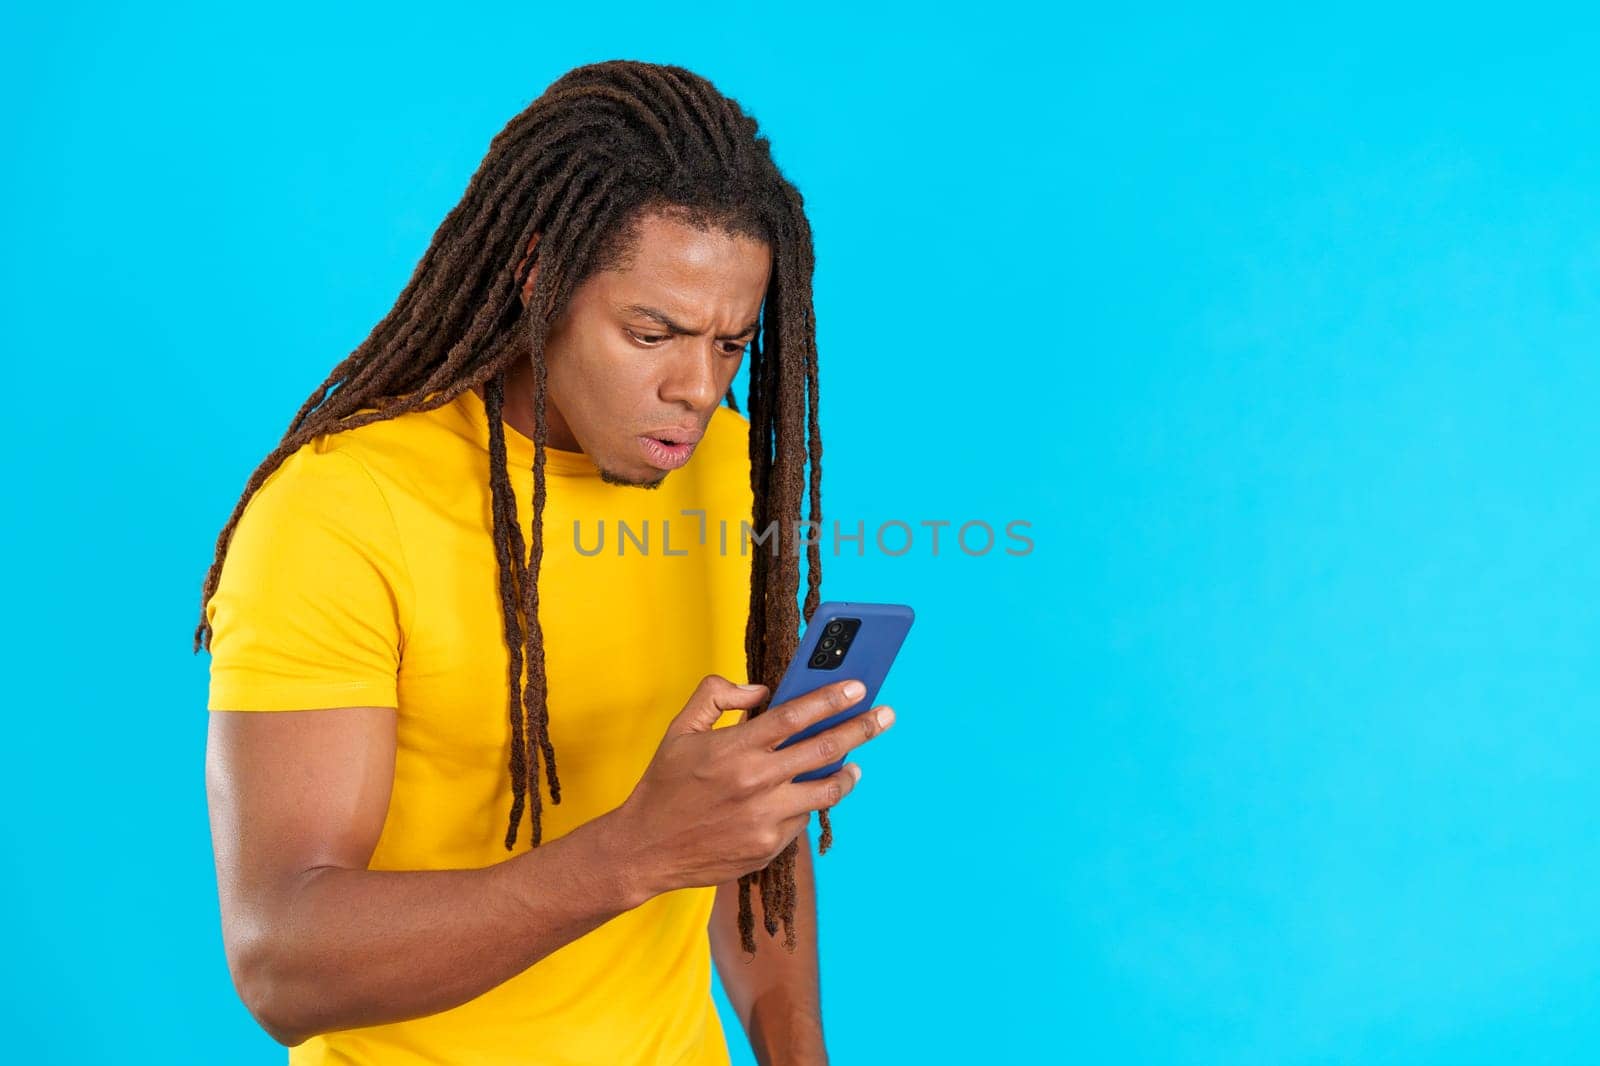 Surprised latin man with dreadlocks looking the screen of a mobile in studio with blue background